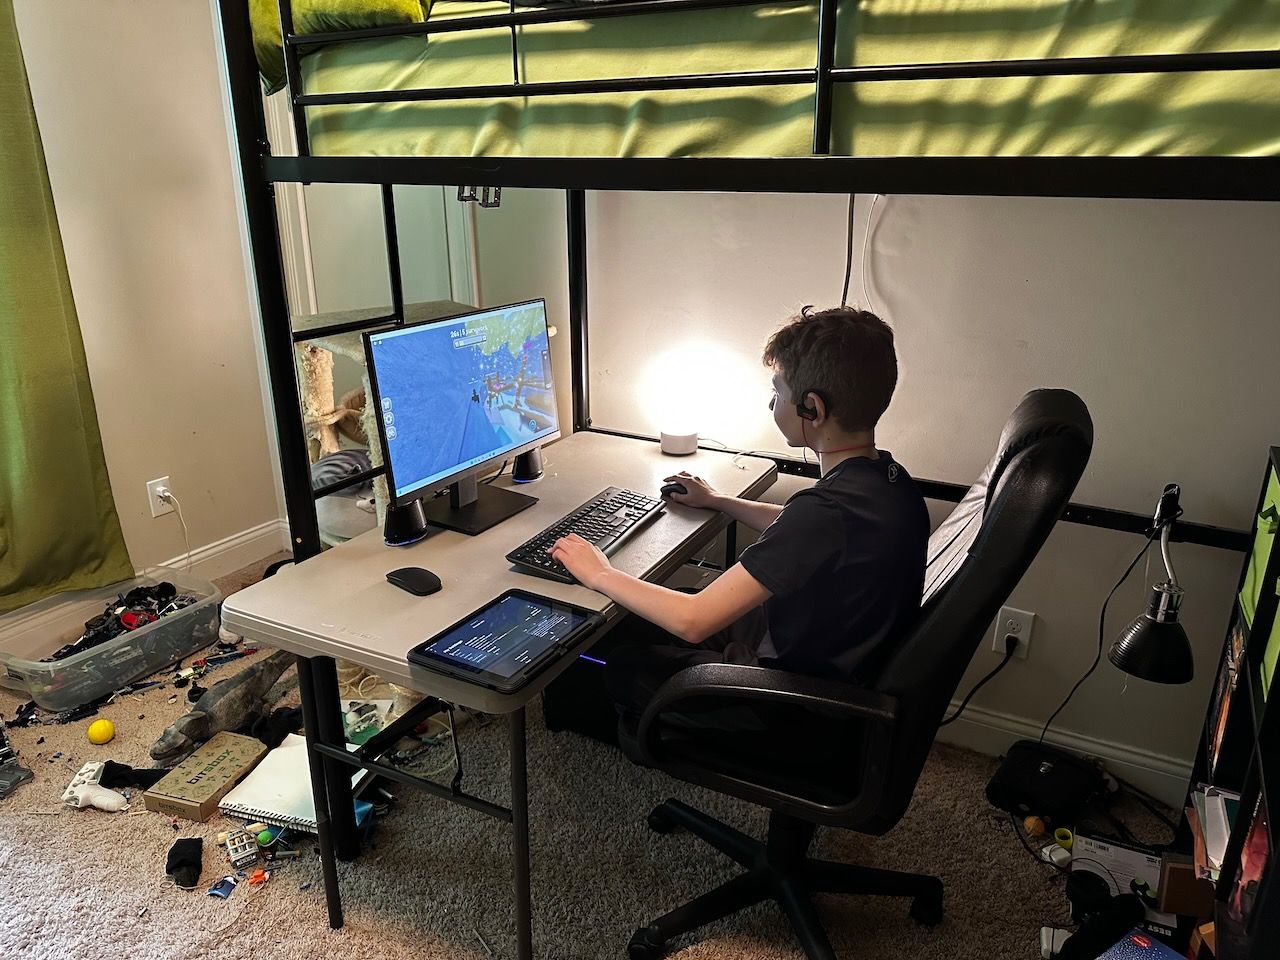 My son playing his first game on the new PC in his room